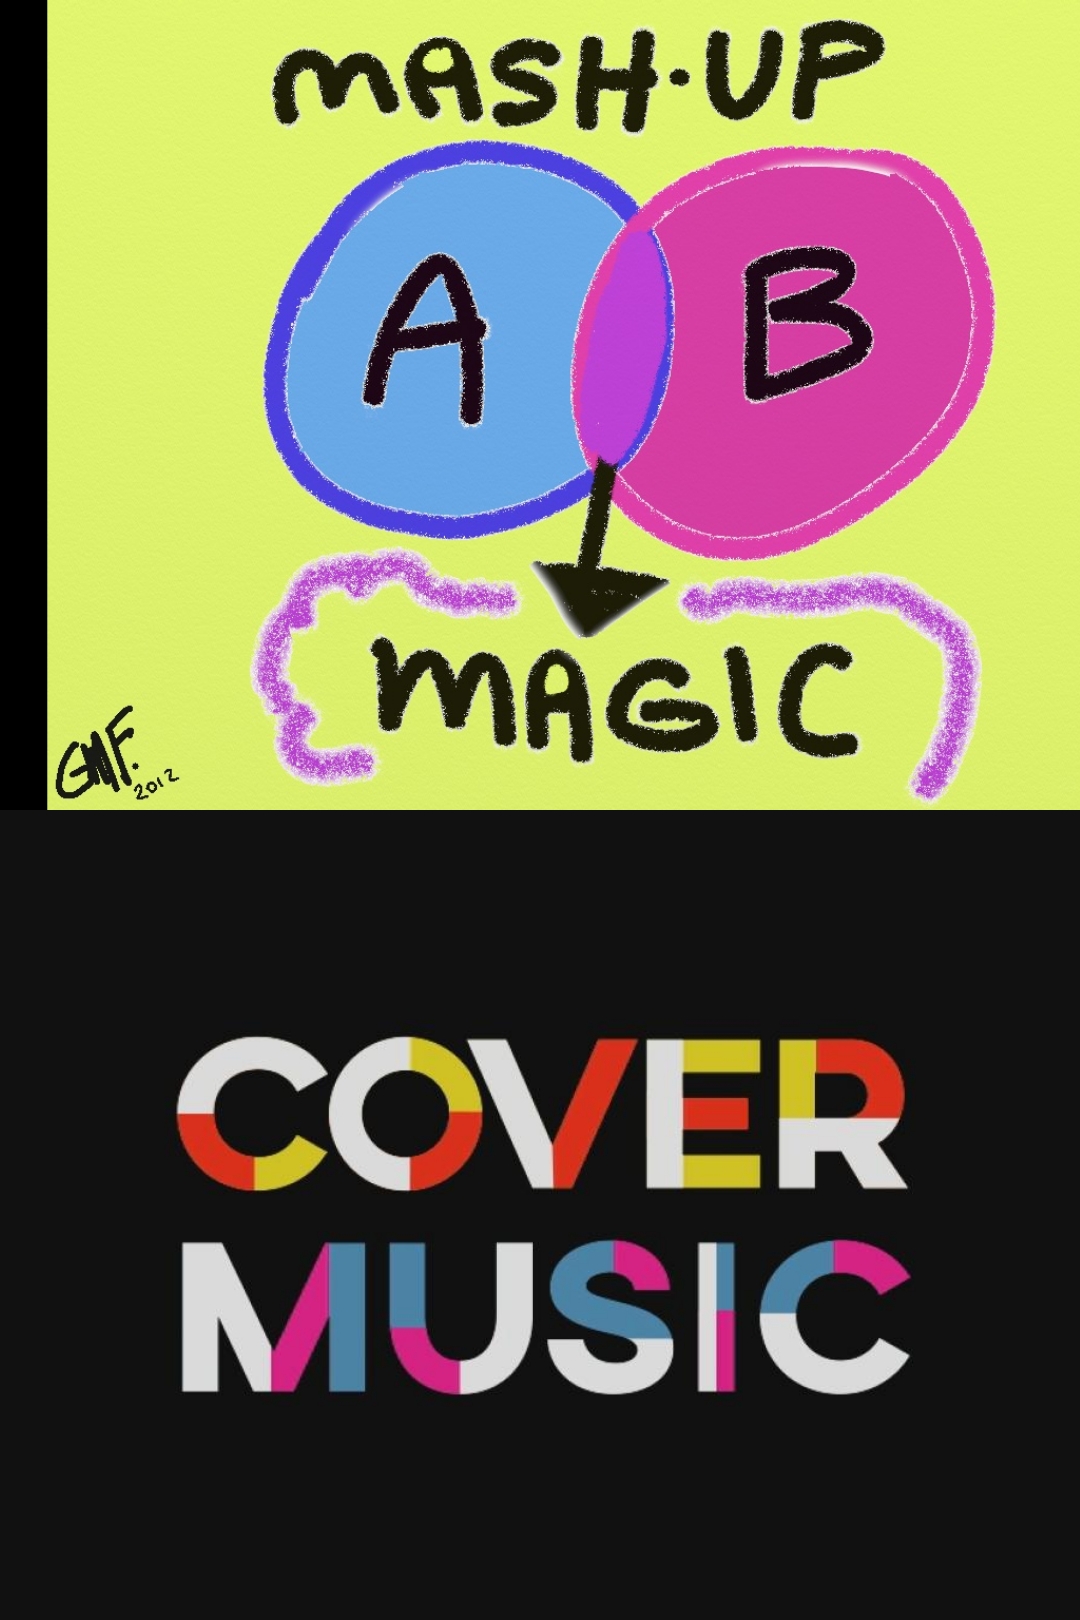 MASHUP#COVER what’s the difference ?